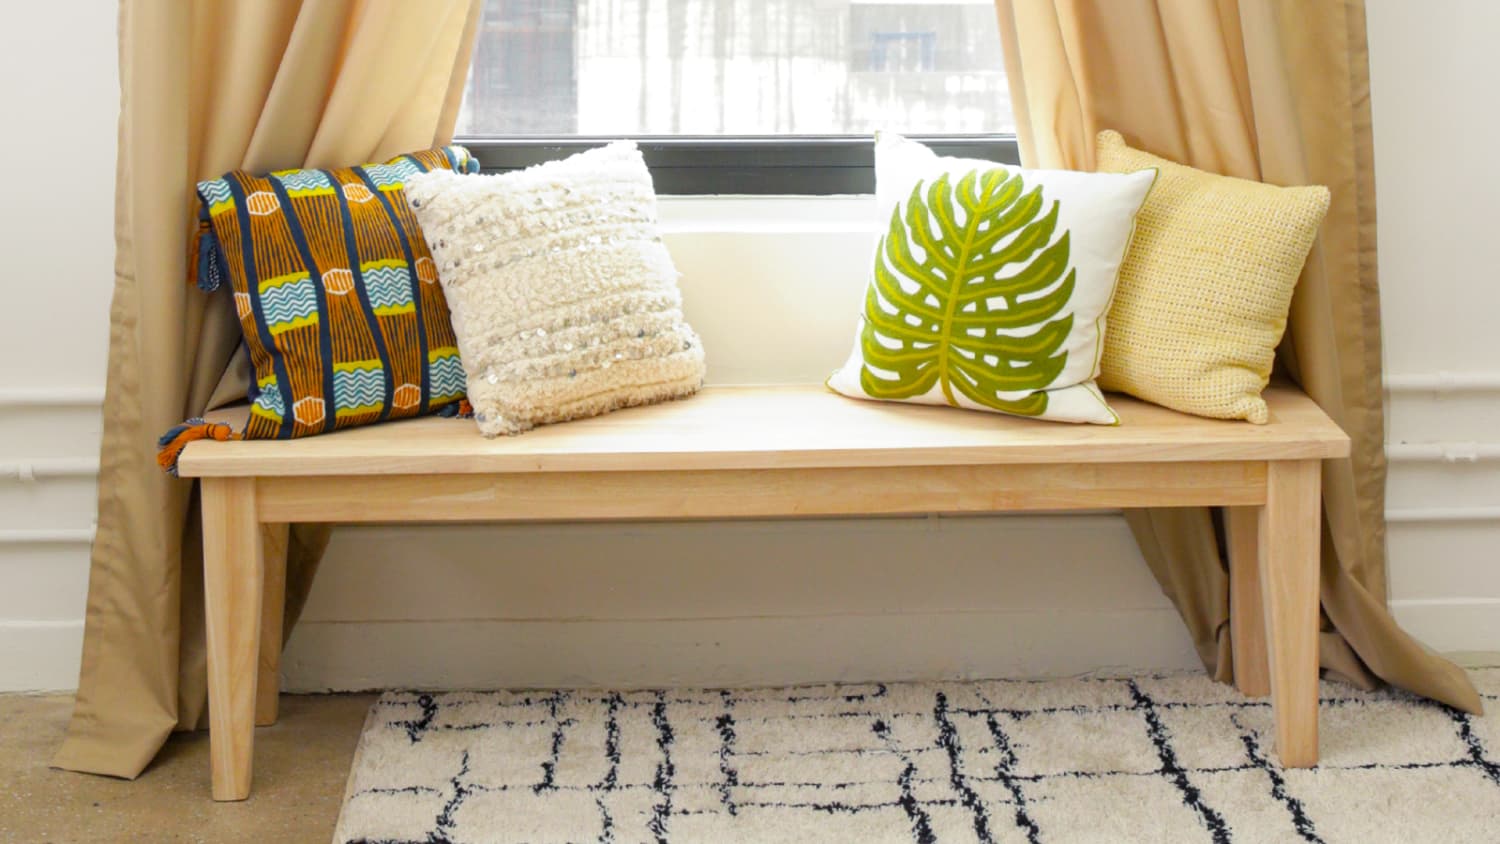 Dos & Don'ts: Window Treatments for Black Windows - Advice for Homeowners